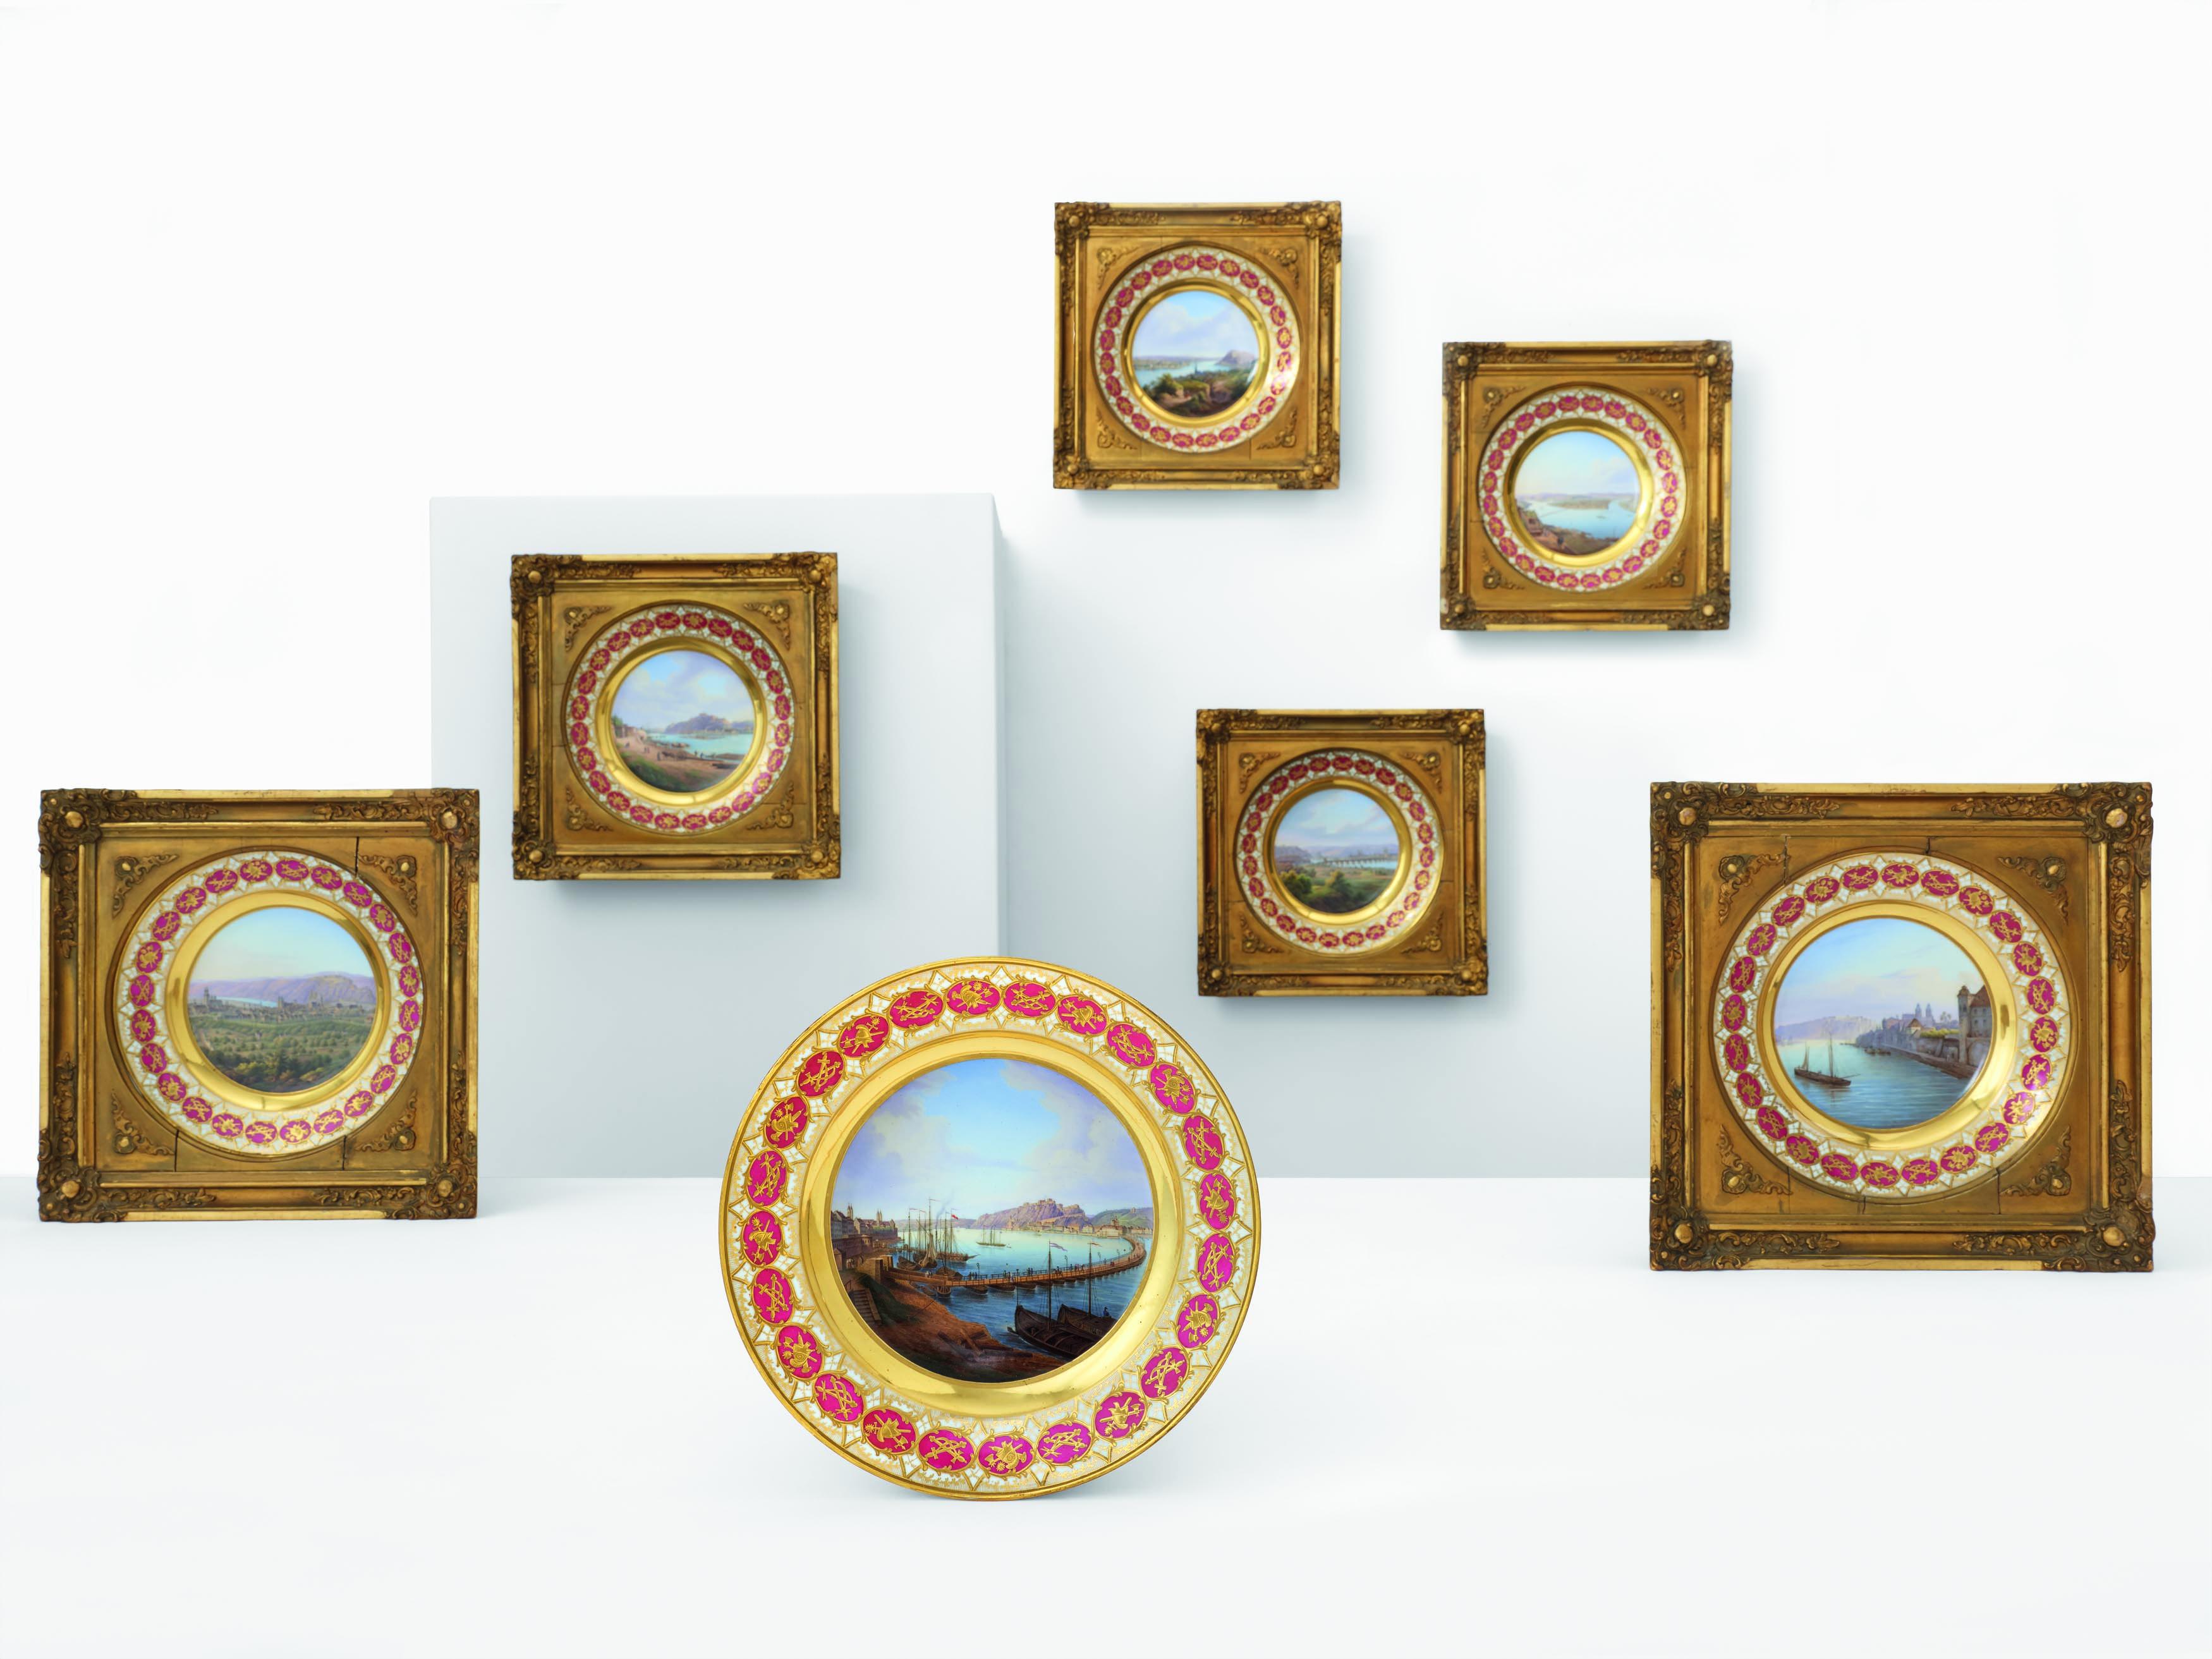 EXEPTIONAL SERIES OF TWELVE PORCELAIN PLATES WITH ROMANTIC VIEWS OF THE RHINE - Image 2 of 26